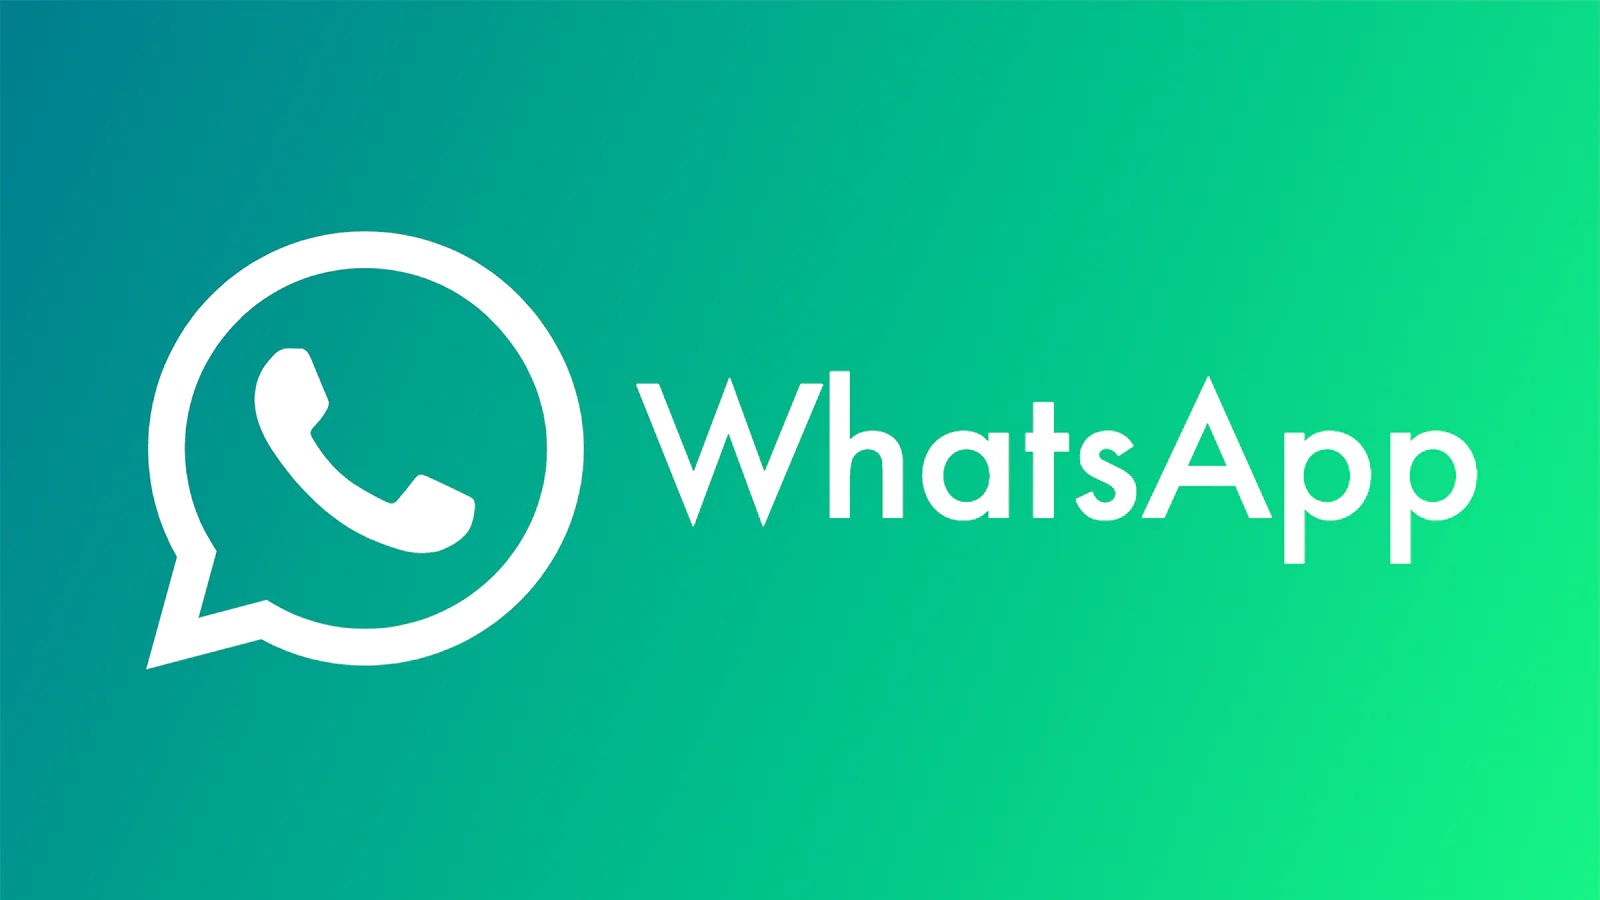 WhatsApp has officially unveiled its new navigation bar